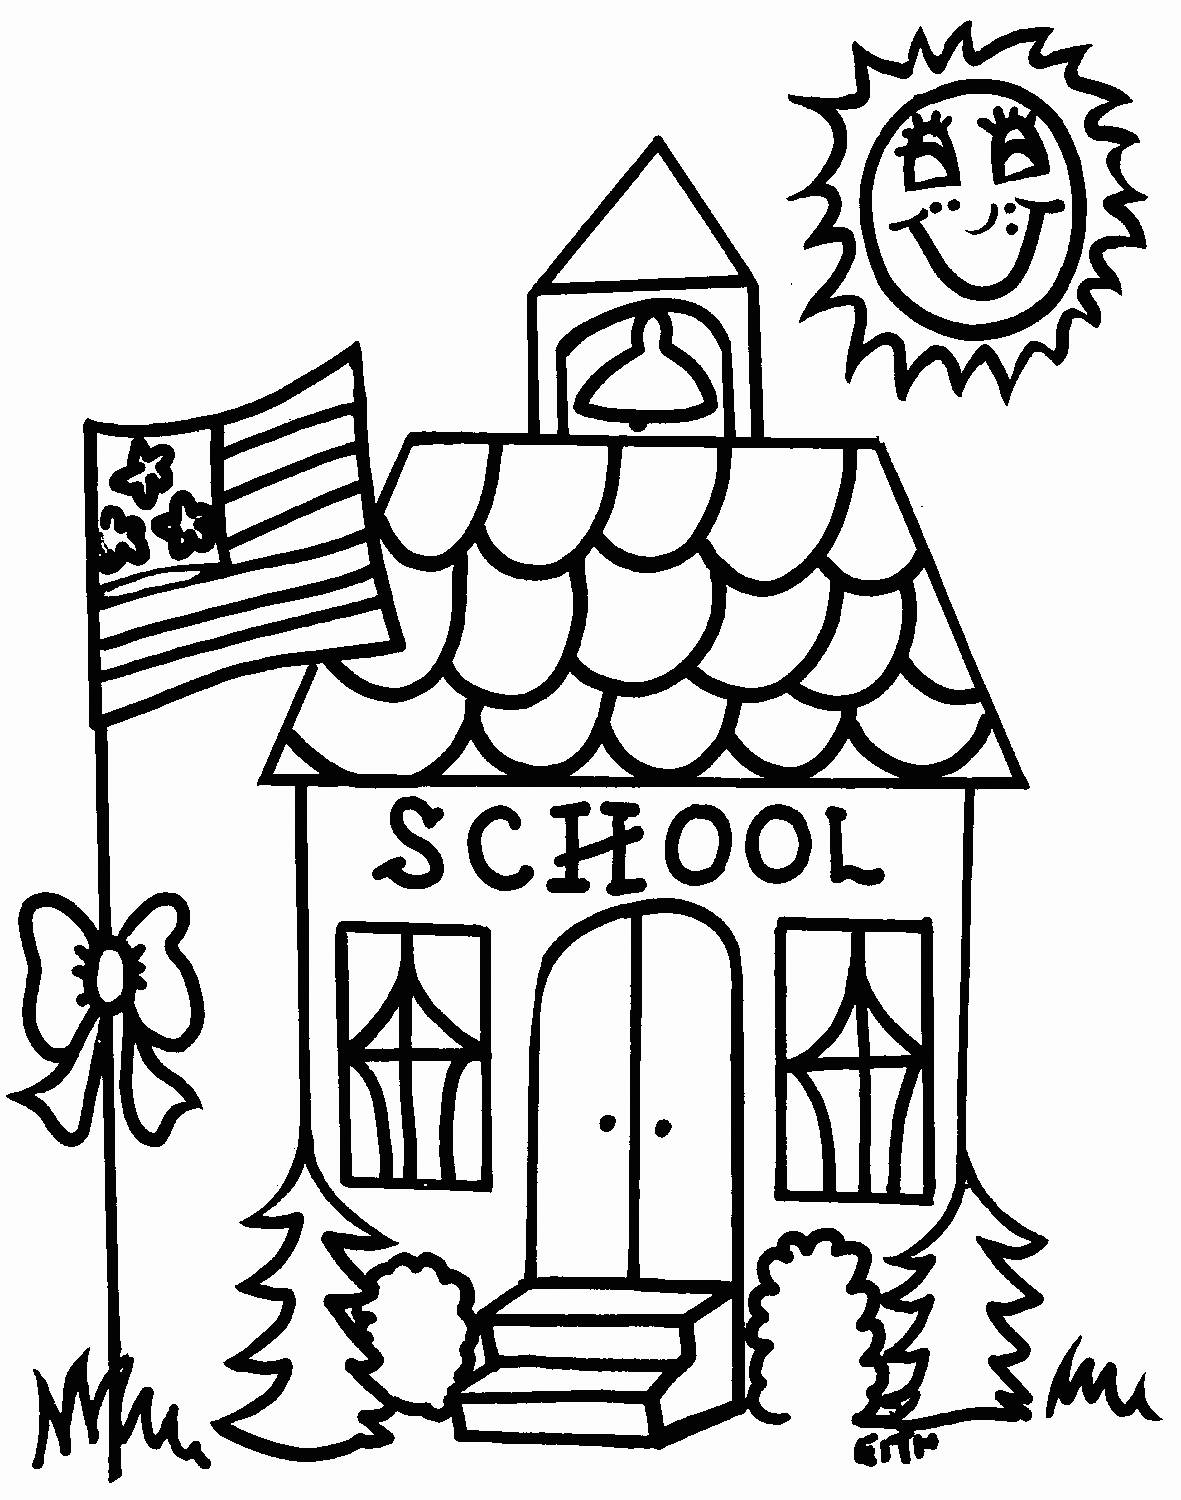 Schoolhouse Coloring Pages   Best Coloring Pages For Kids